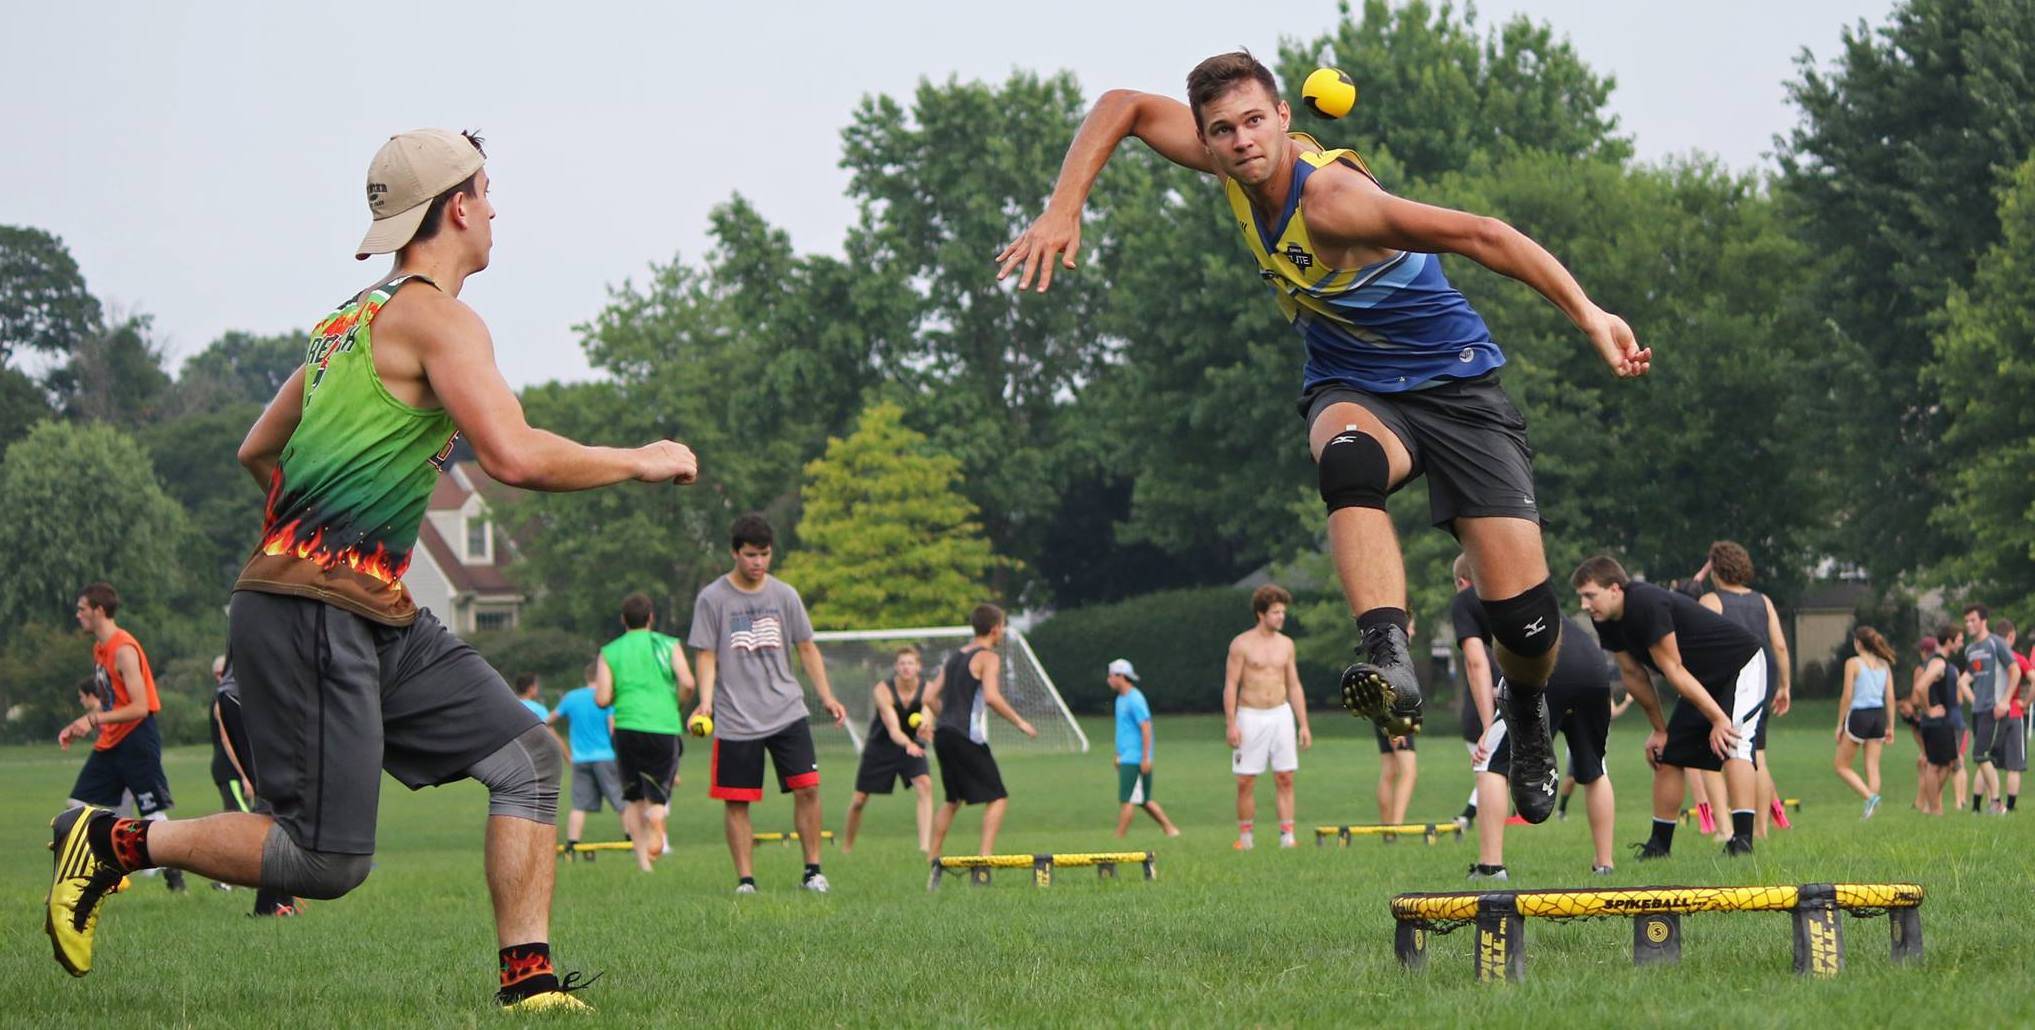 New Spikeball tournament tradition brings fun and excitement to students